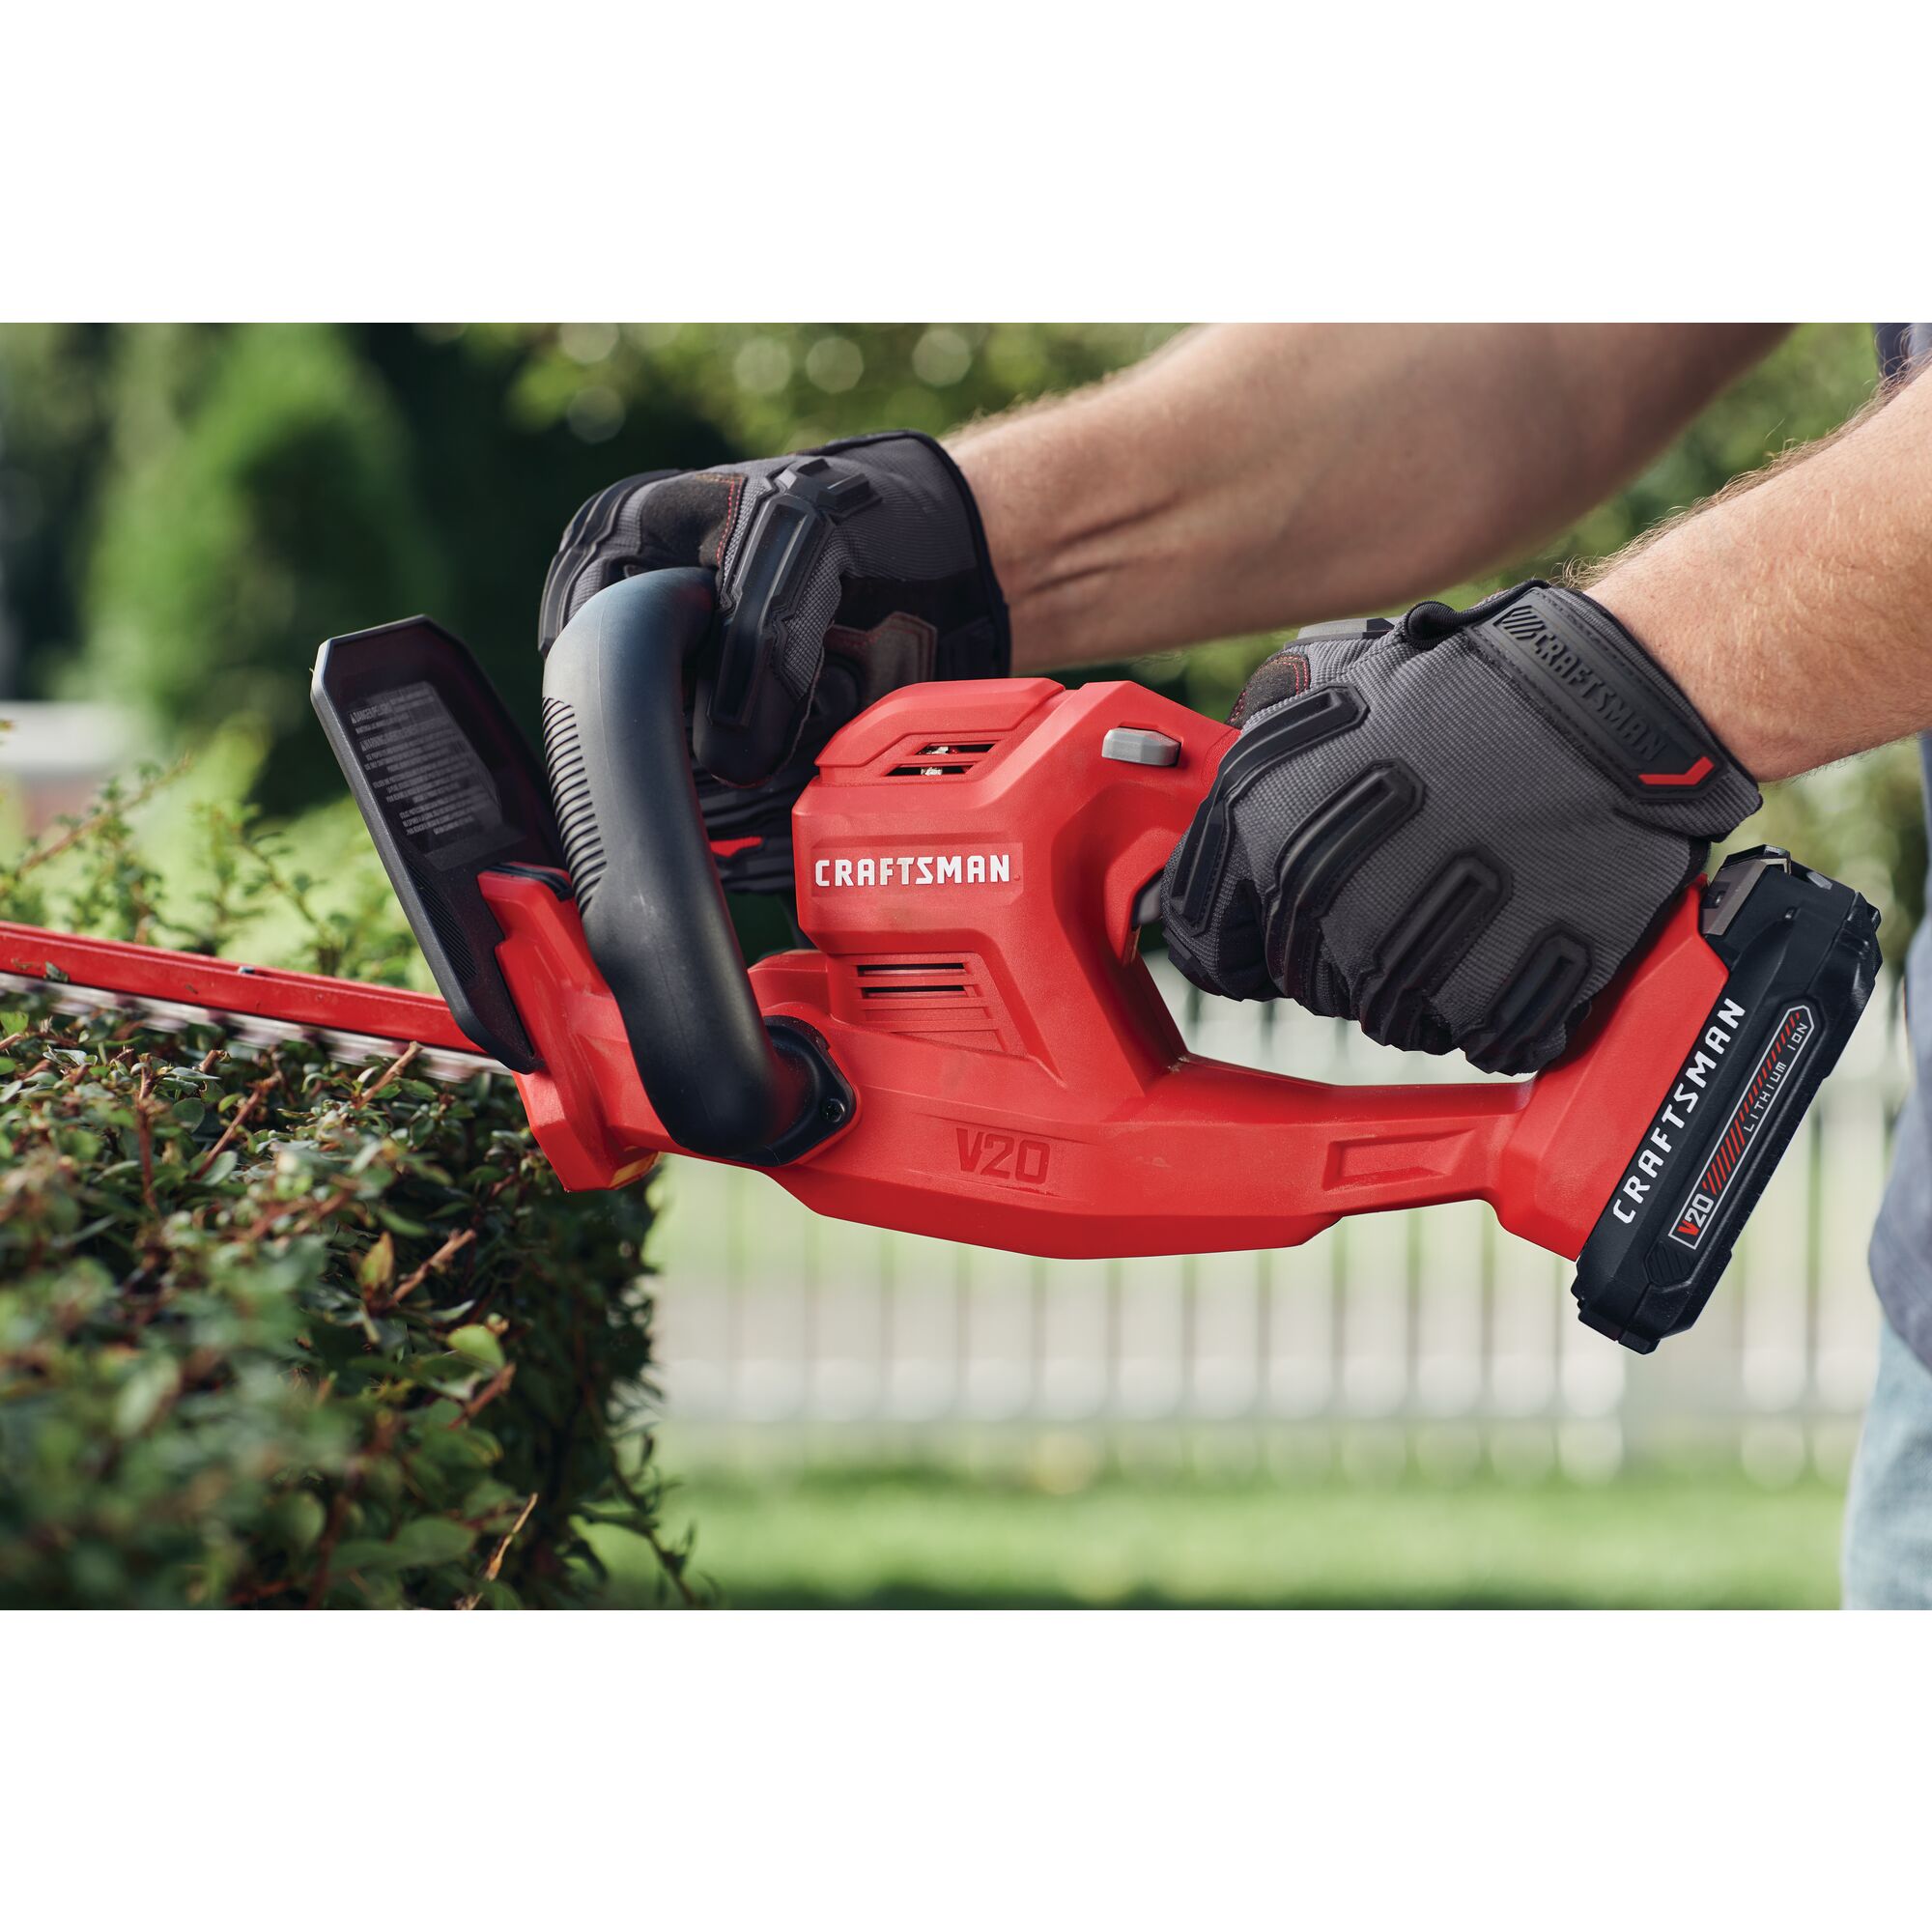 Full wrap-around handle feature of cordless 20 inch hedge trimmer kit 1.5 Ampere hour.